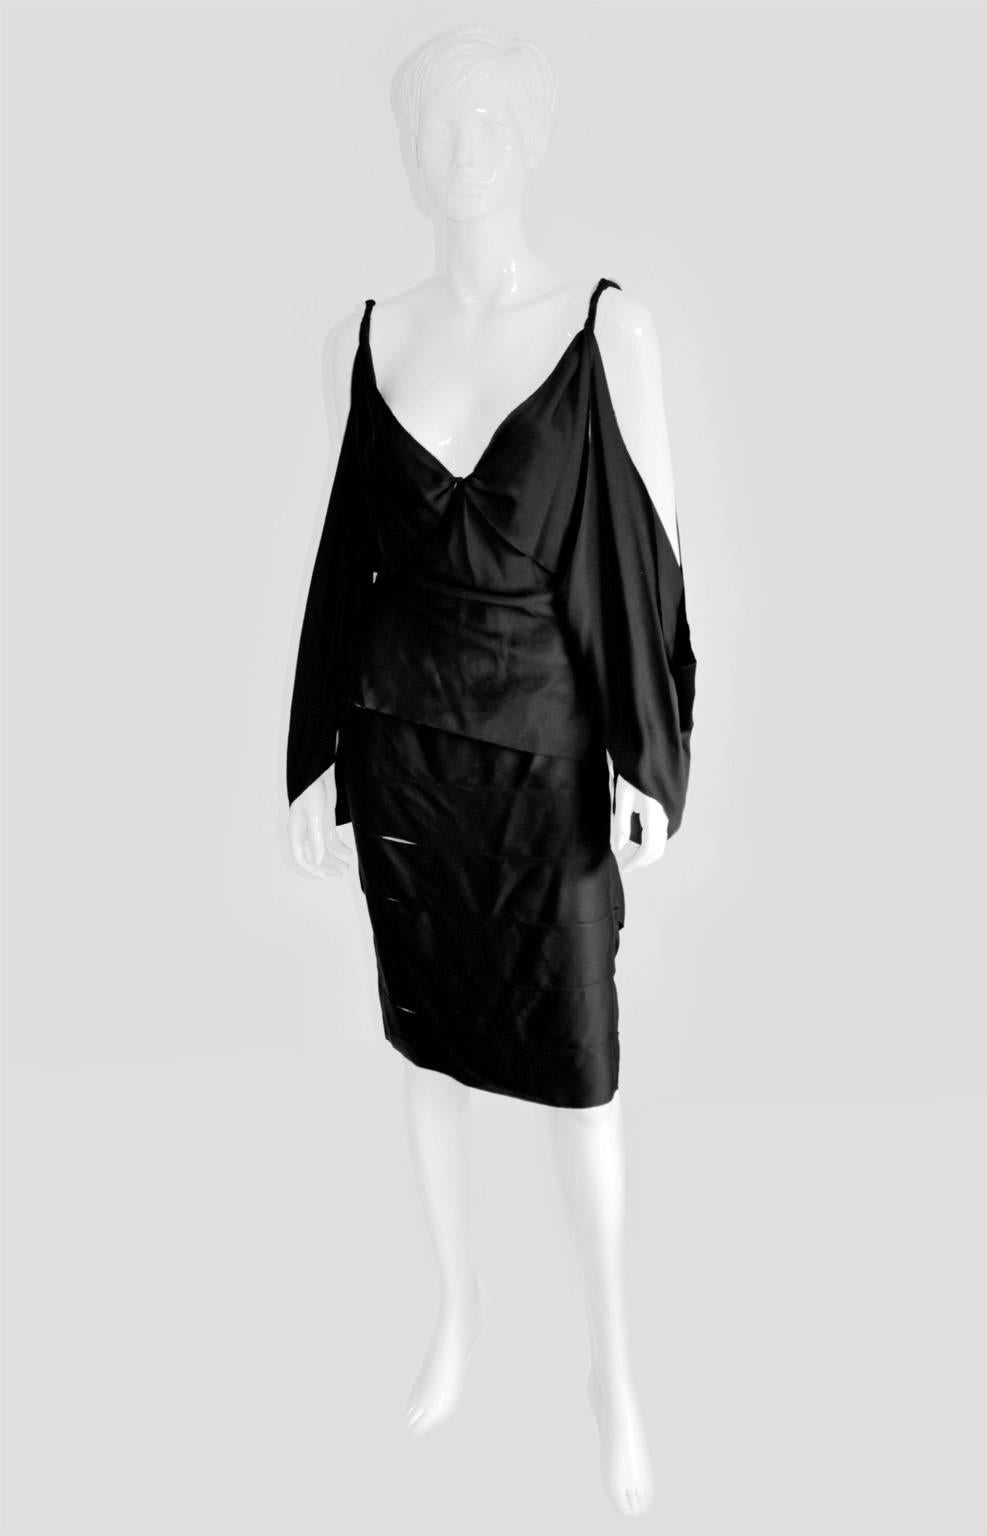 Heavenly Tom Ford Gucci FW 2002 Gothic Collection Black Silk Kimono Top & Skirt In Excellent Condition In Melbourne, AU